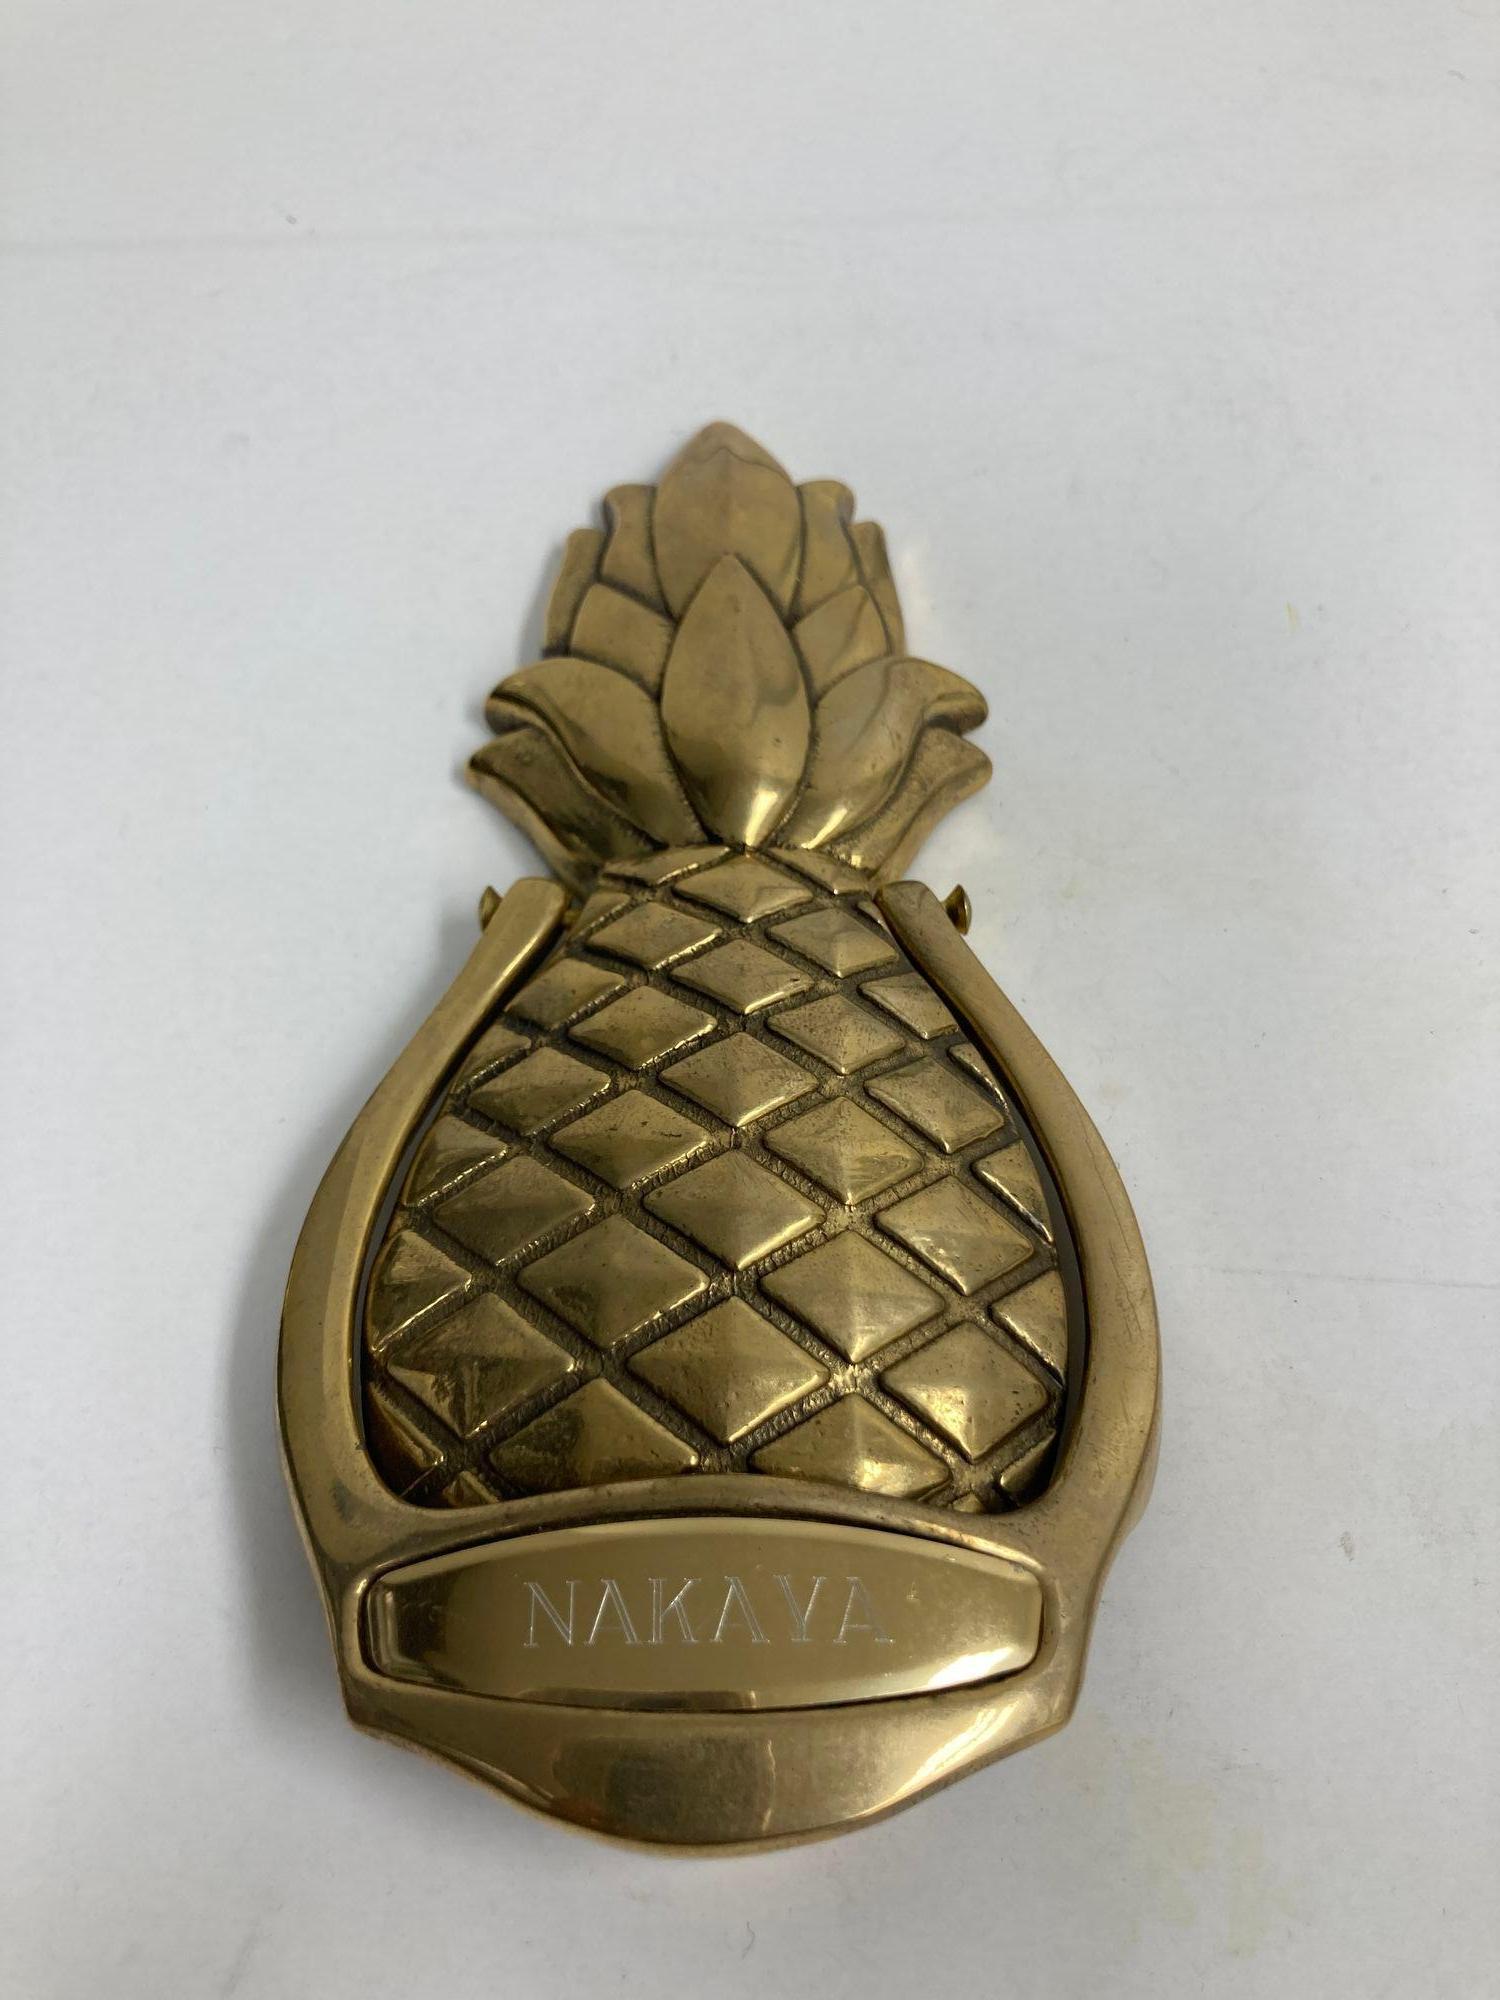 Vintage Solid Brass Pineapple Door Handle.
Vintage solid brass pineapple shaped door knocker.
Vintage Decorative Front Door knocker, make a fun first impression with this beautiful solid brass pineapple door knocker. Dimensions: 3.5